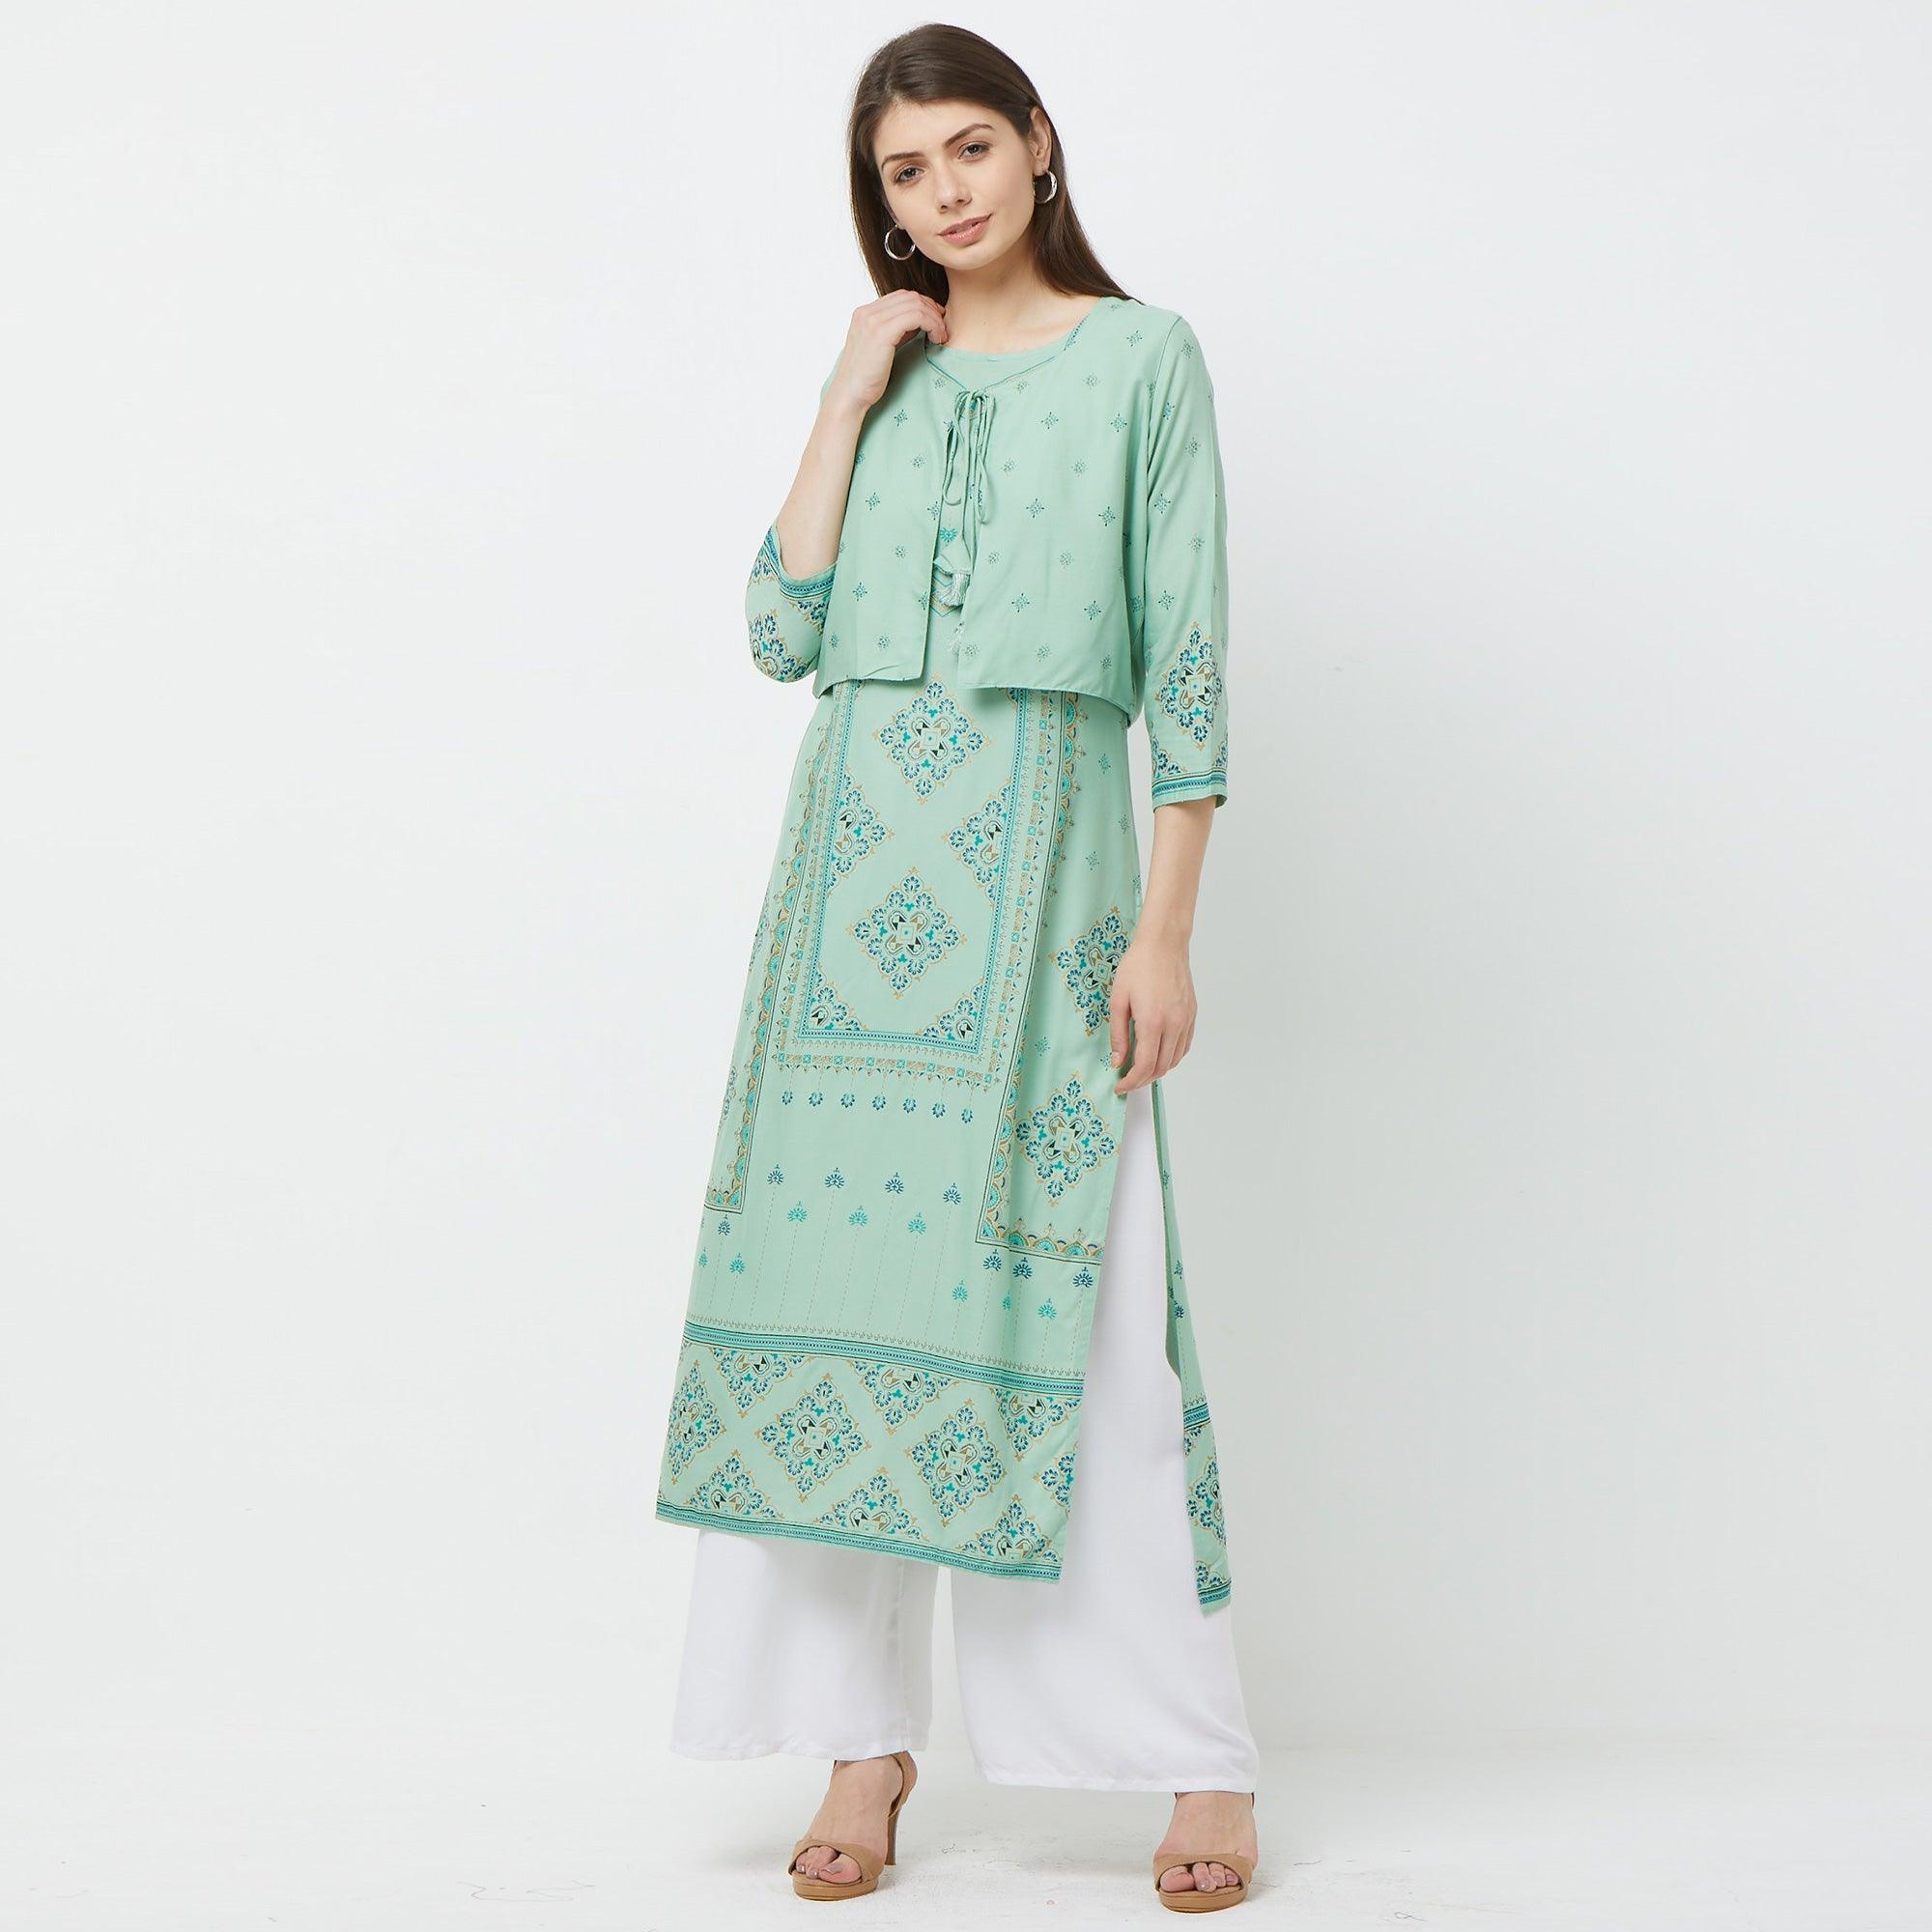 Round Neck Ladies Designer Short Top Kurti With Embroidery Koti, Size: XL  at Rs 499 in Surat